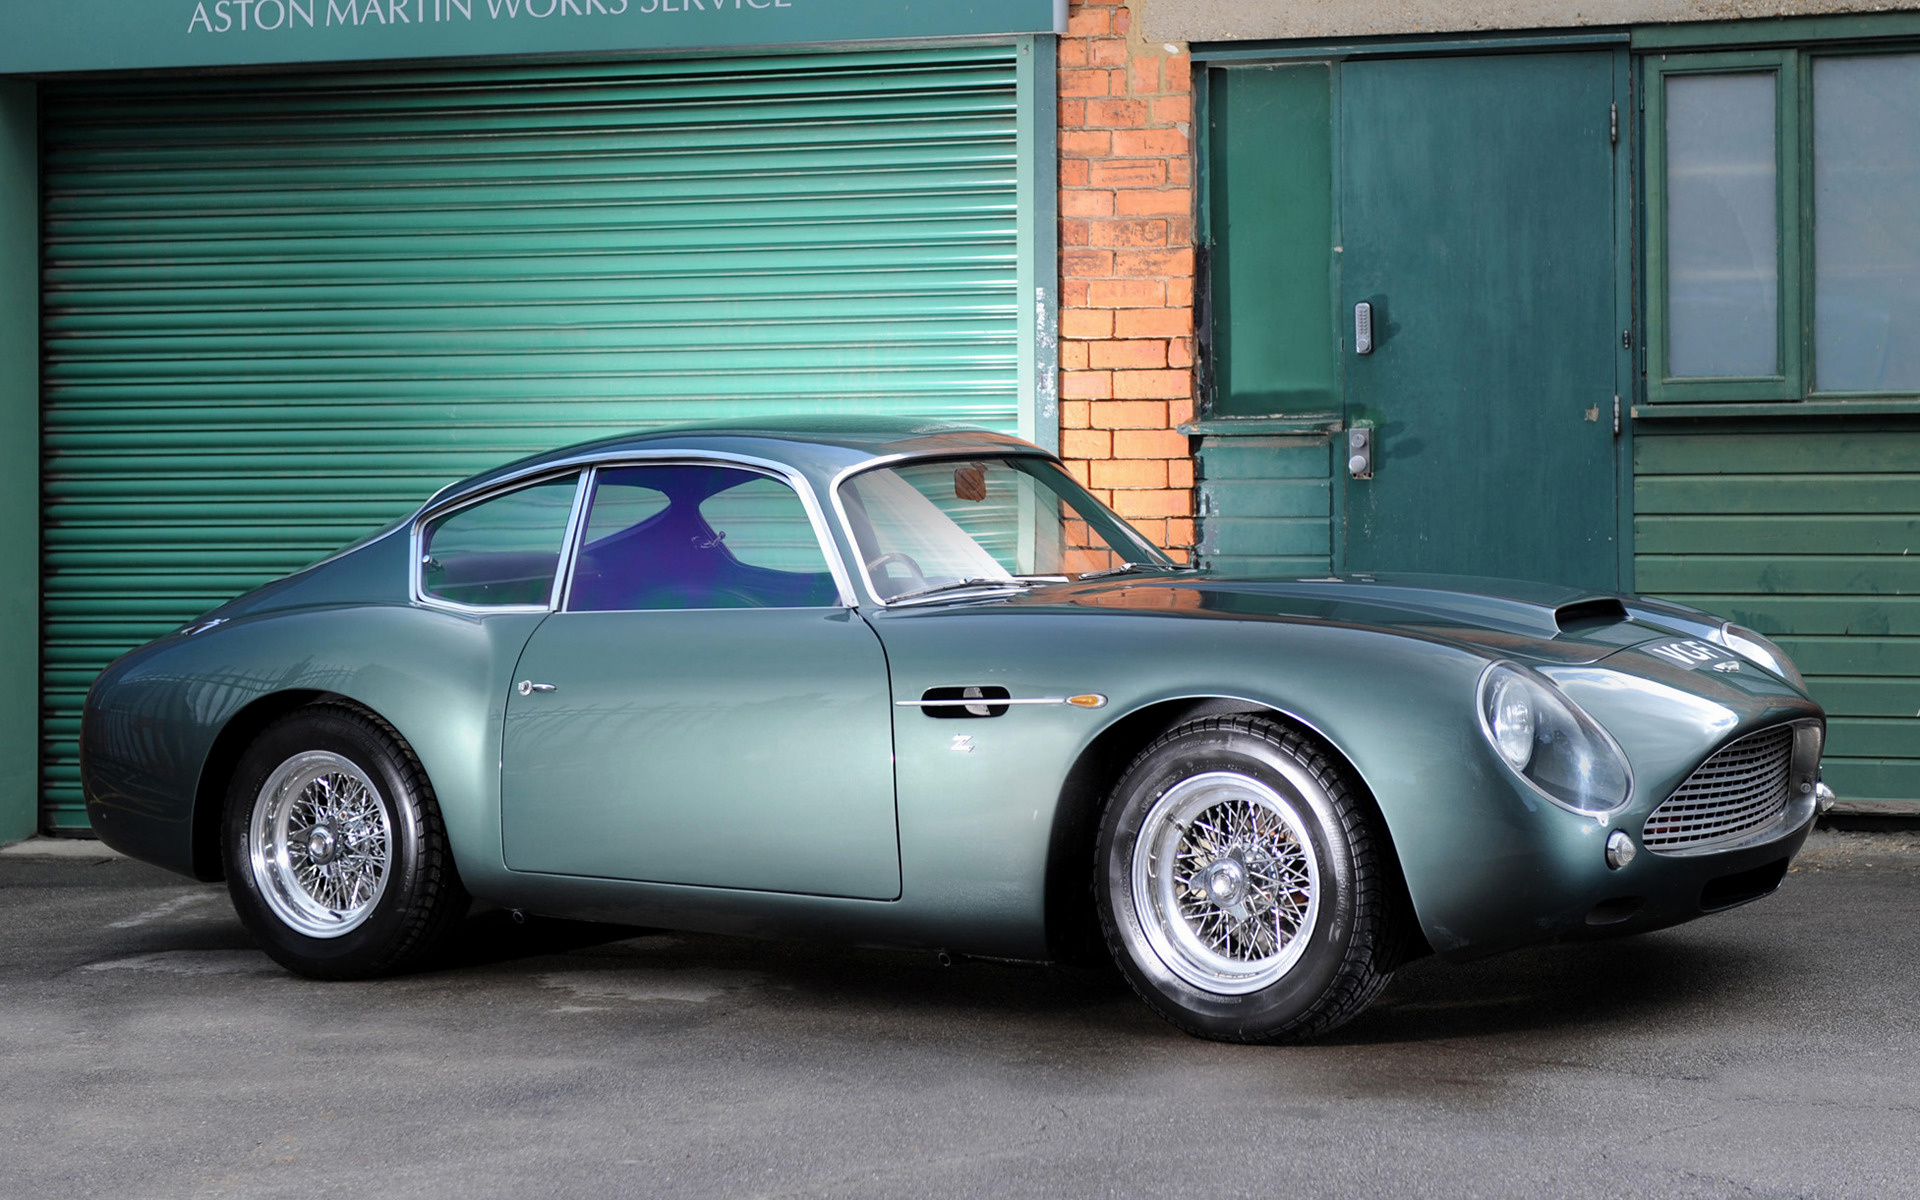 1991 Aston Martin DB4 GT Zagato Sanction II - Wallpapers and HD Images